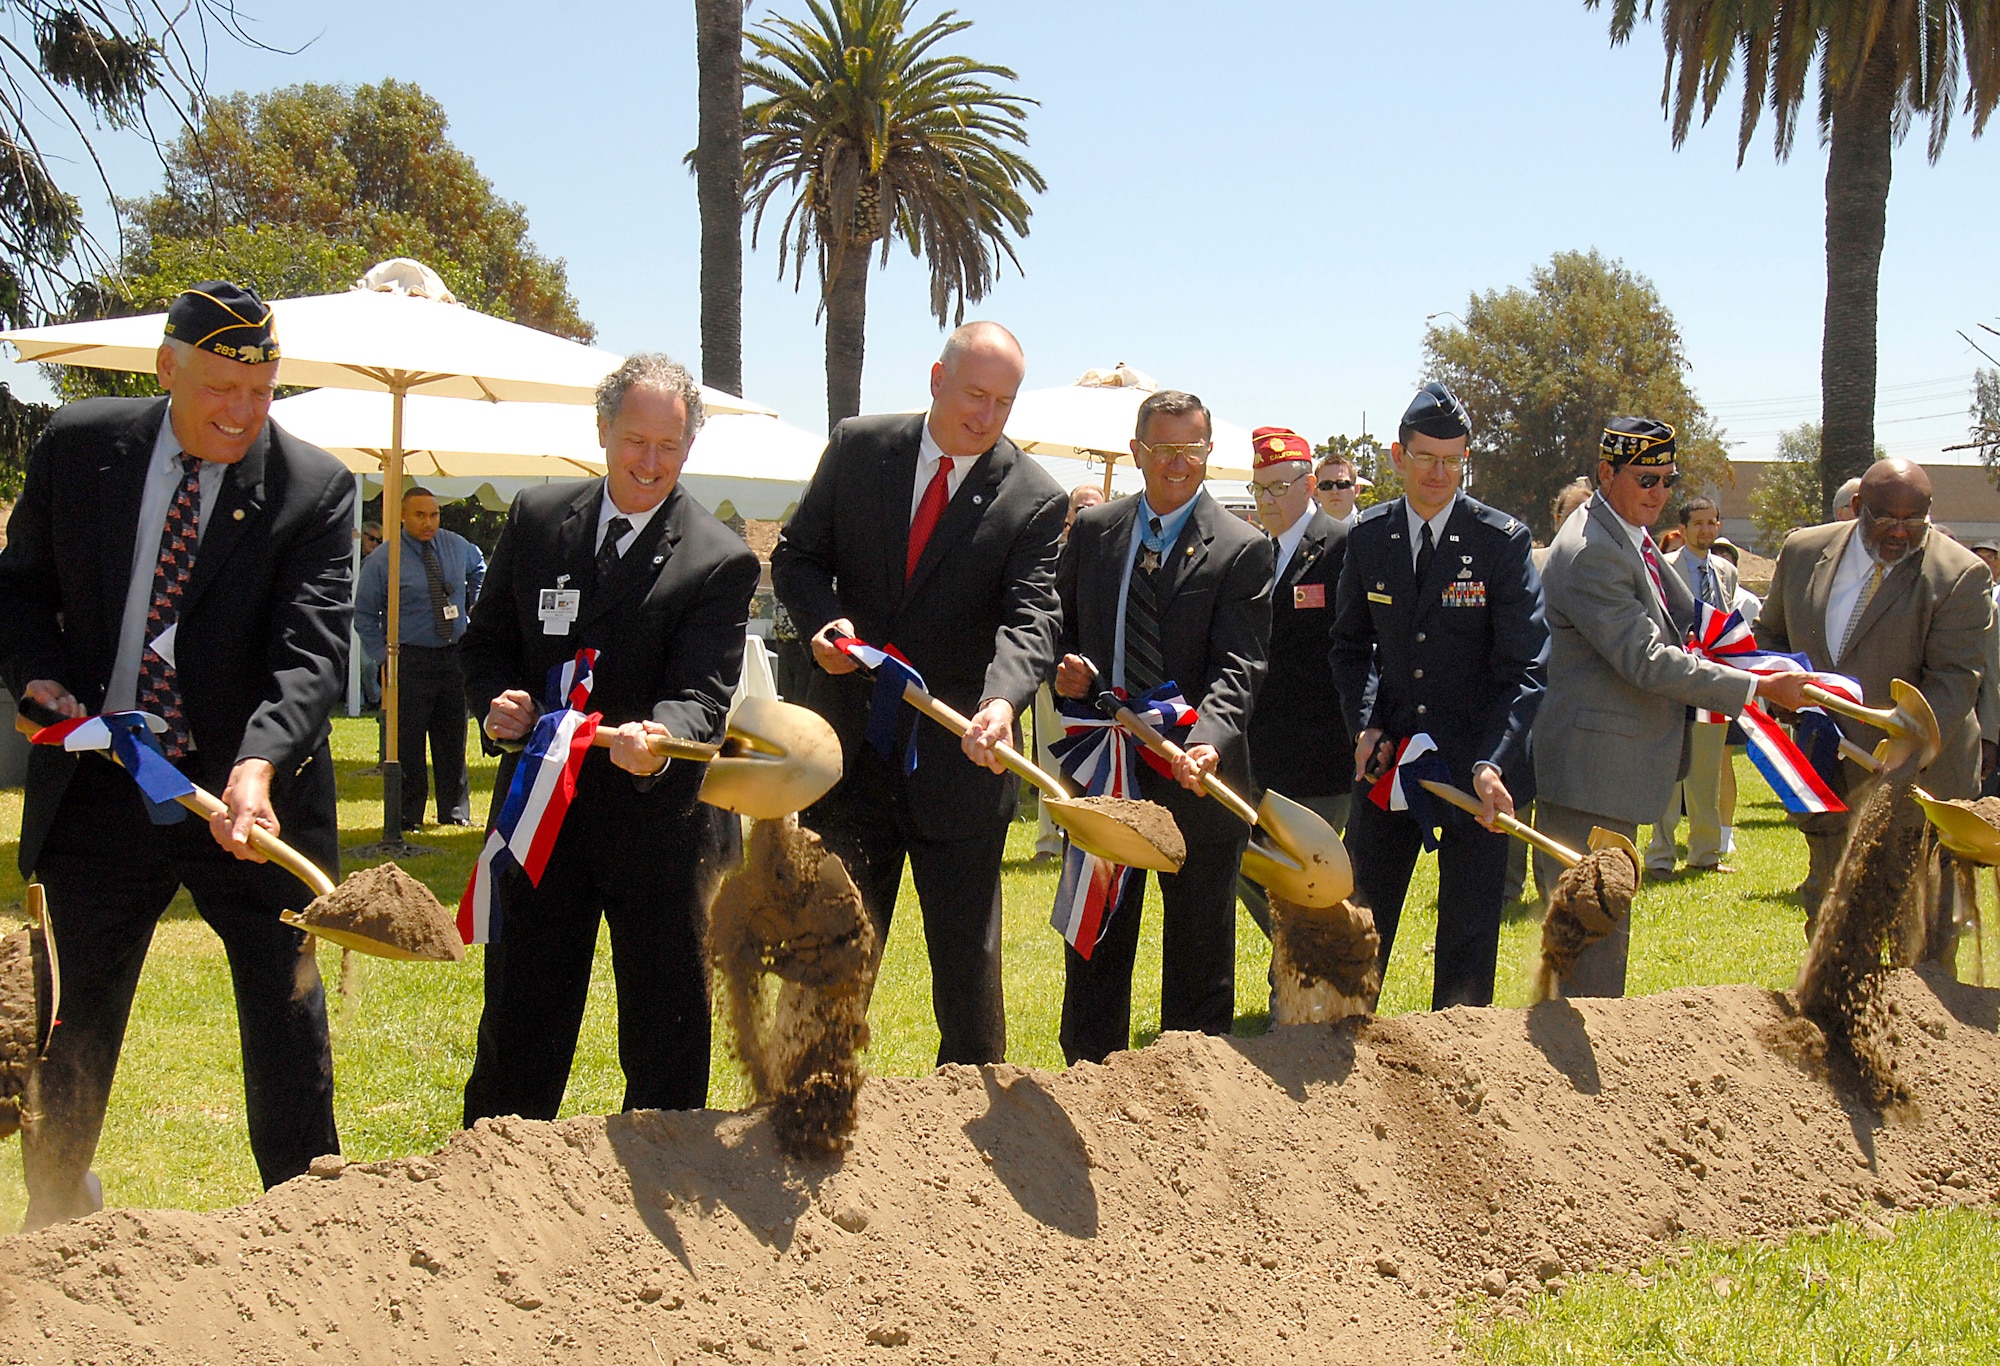 Col. Joseph Schwarz, 61st Air Base Wing commander, participated in the groundbreaking for a new Fisher House on the grounds of the VA's West Los Angeles campus.  The Pacific Palisades American Legion Post 283 donated $2 million to project that broke ground July 1.  In times of need, the Fisher House provides the opportunity for family members to be close to a loved one at the most stressful times -hospitalization for an illness, disease or injury.  (Photo by Joe Juarez)